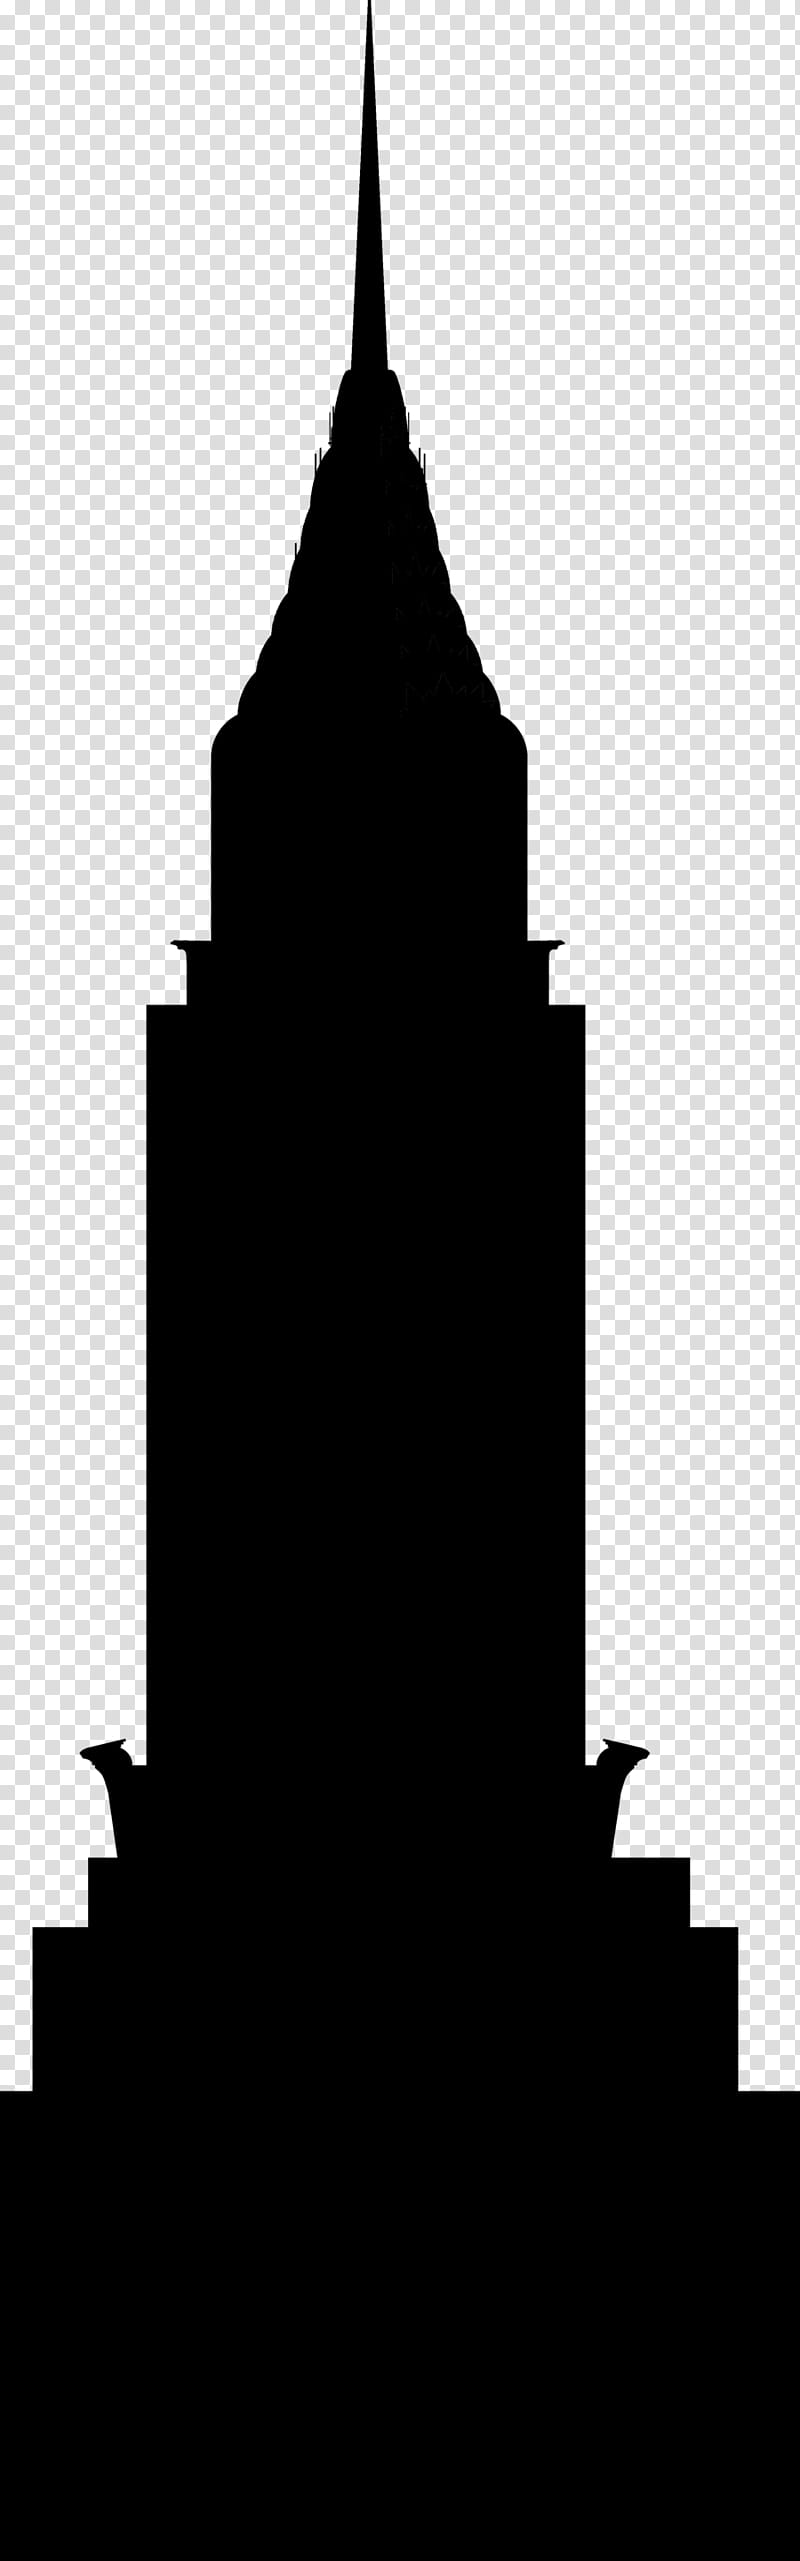 Silhouette City, Tree, Steeple, Spire Inc, Black, Logo transparent background PNG clipart